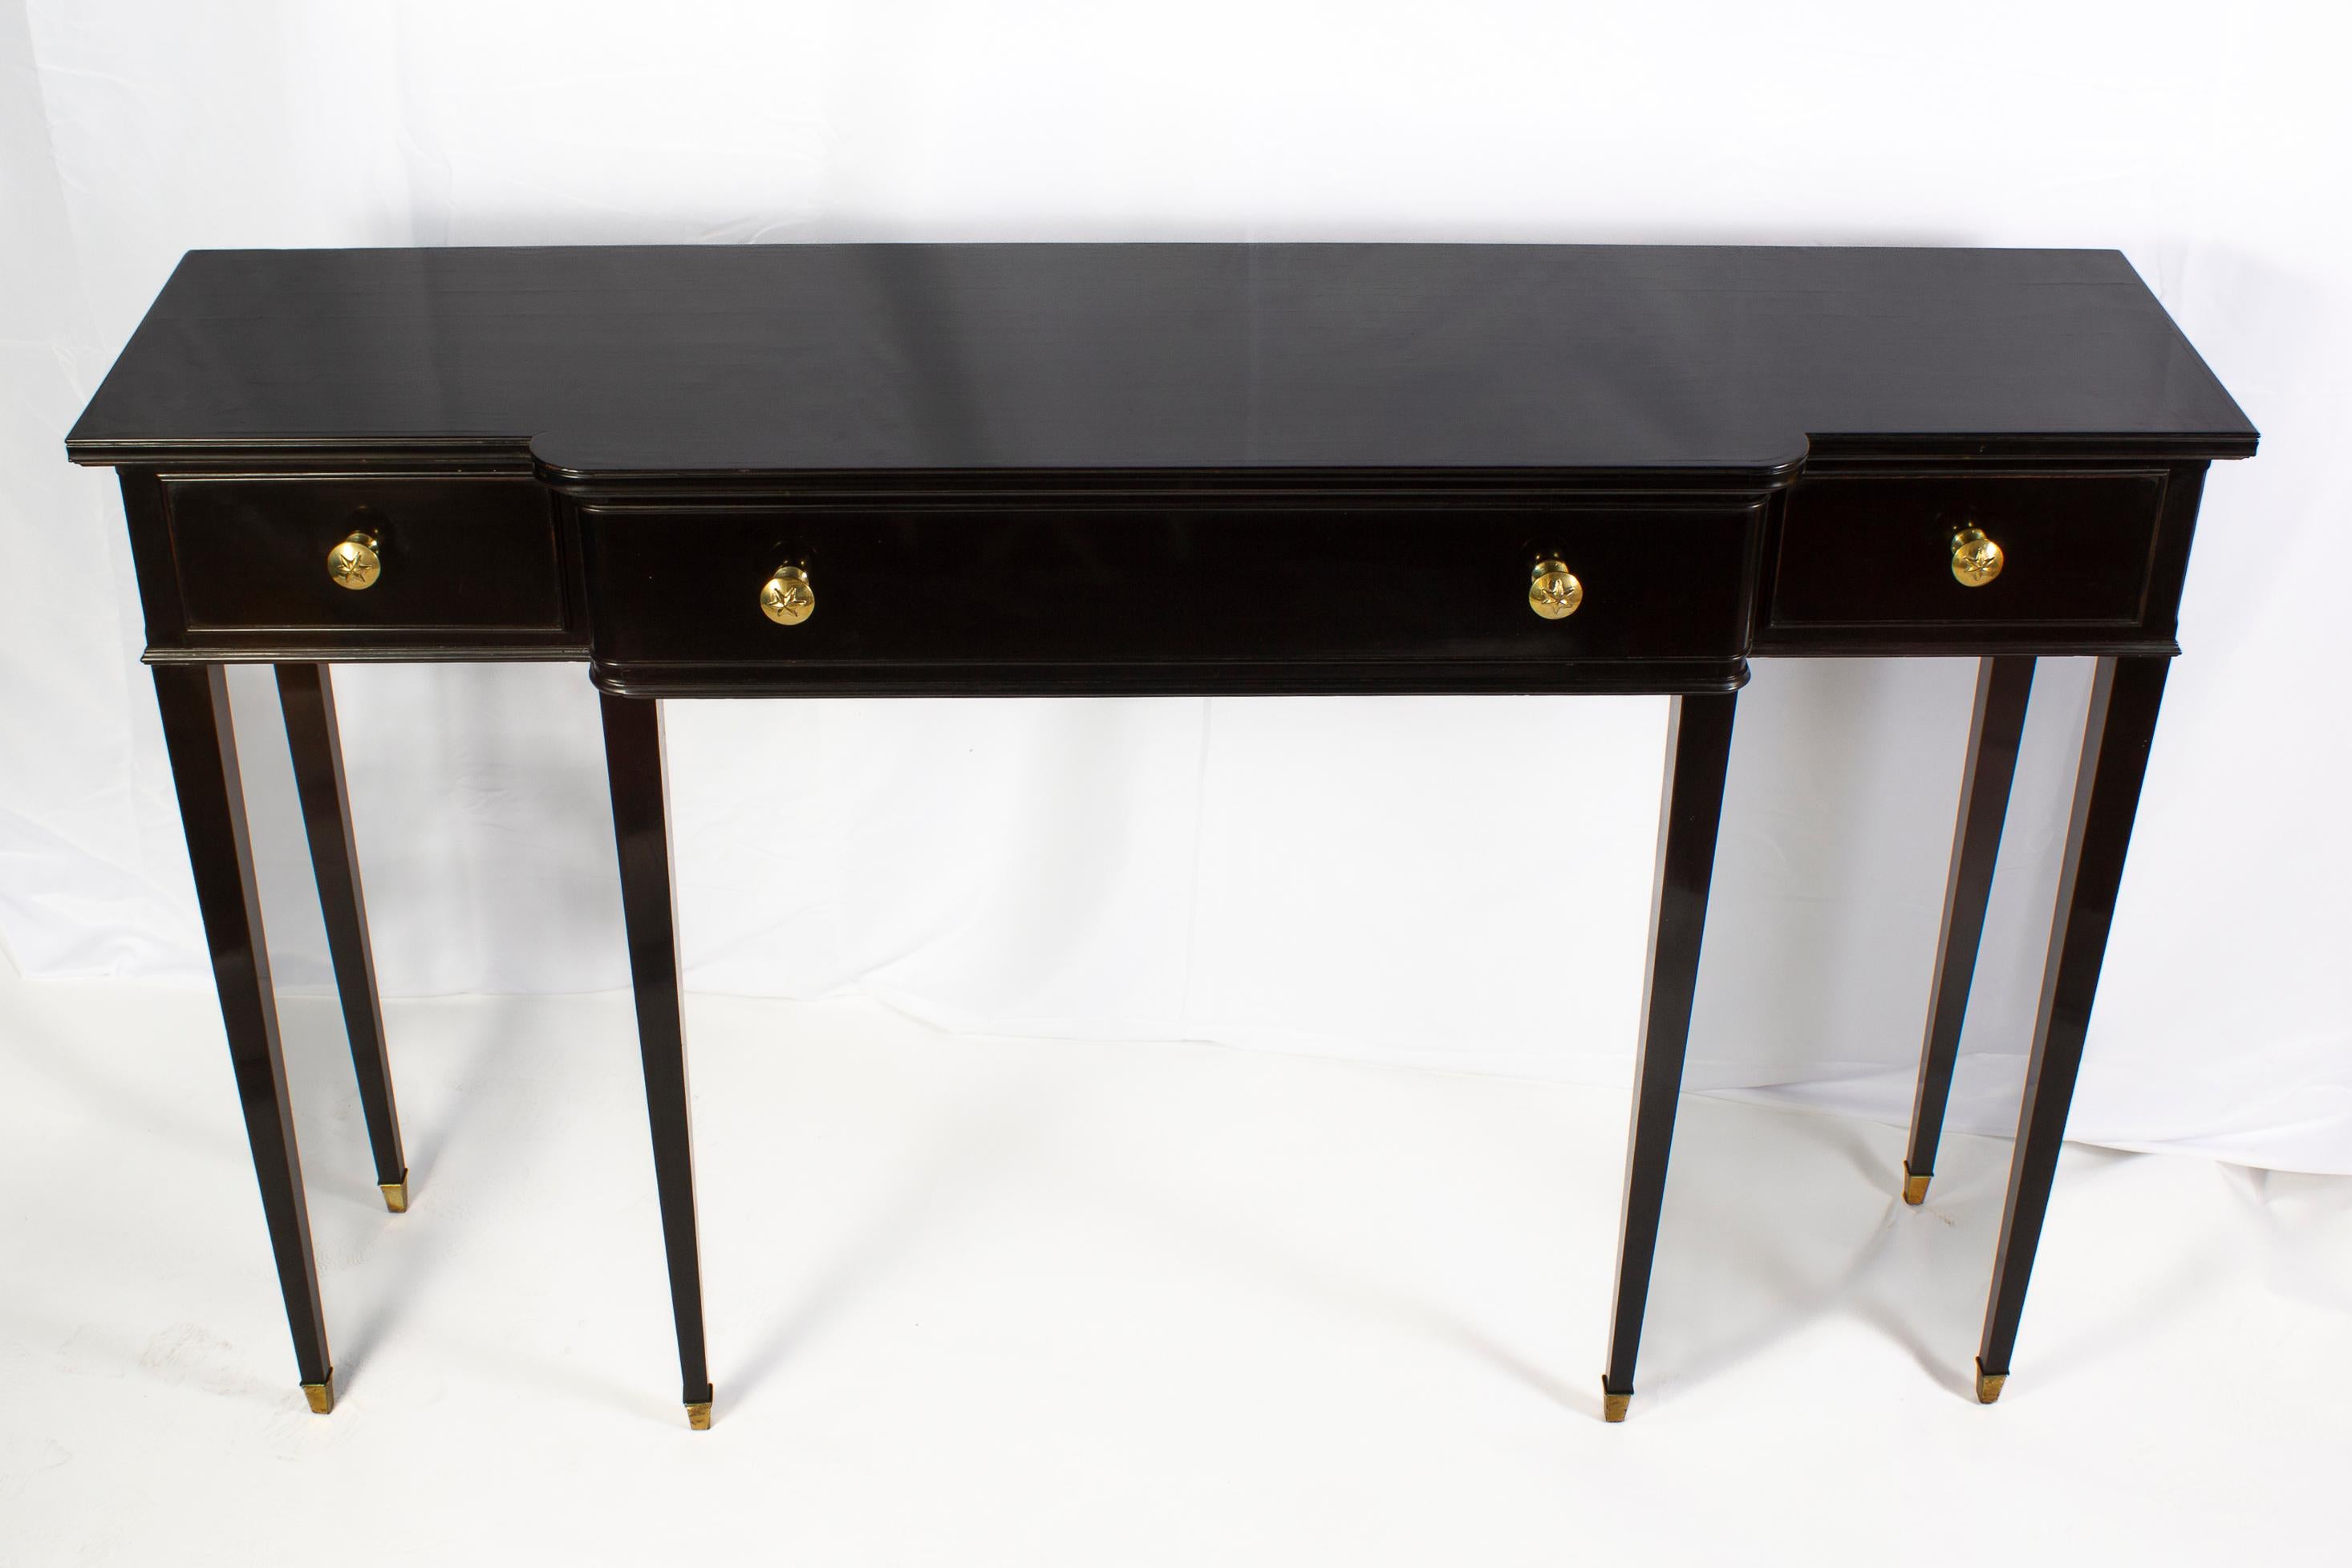 Elegant pair of Italian Midcentury Black lacquered console tables with three drawers ornate with brass .
 Square tapering legs with bronze mounts.
 Attributed to Paolo Buffa, famous Italian designer of the 50'.
 Excellent vintage condition.